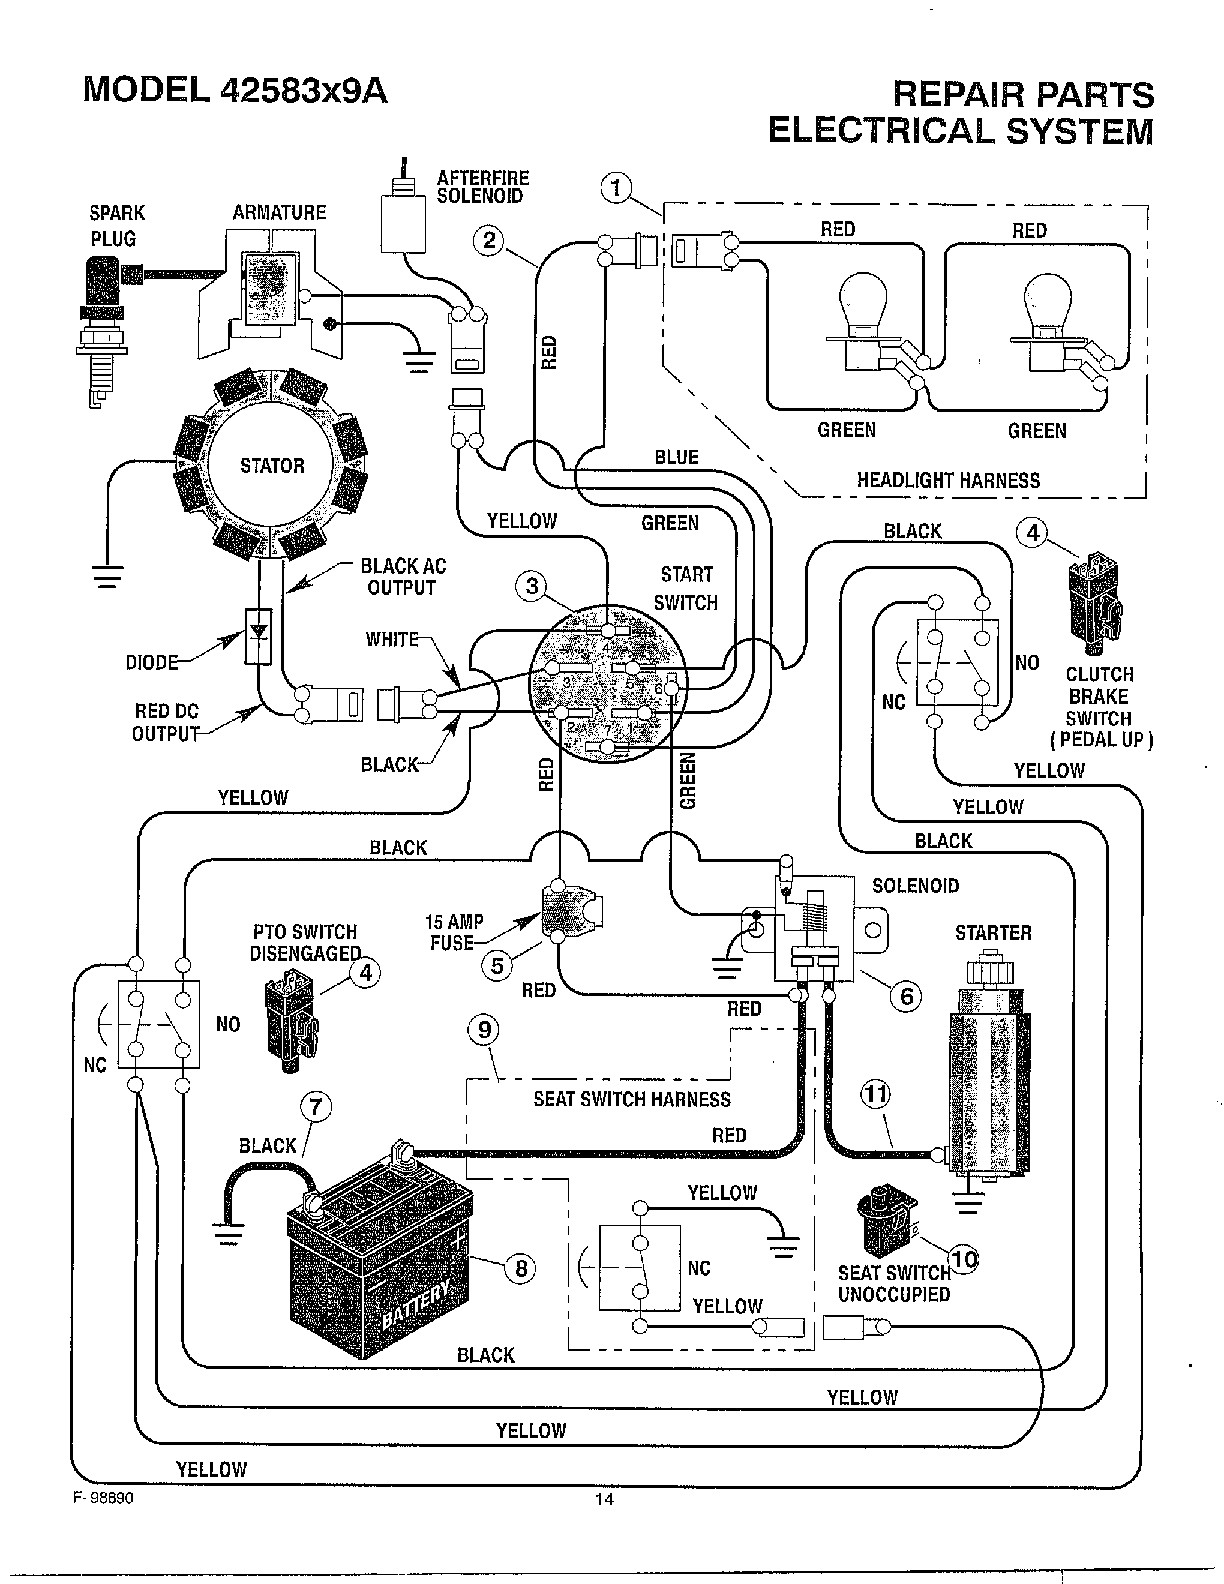 19 Hp Briggs And Stratton Wiring Diagram from mainetreasurechest.com